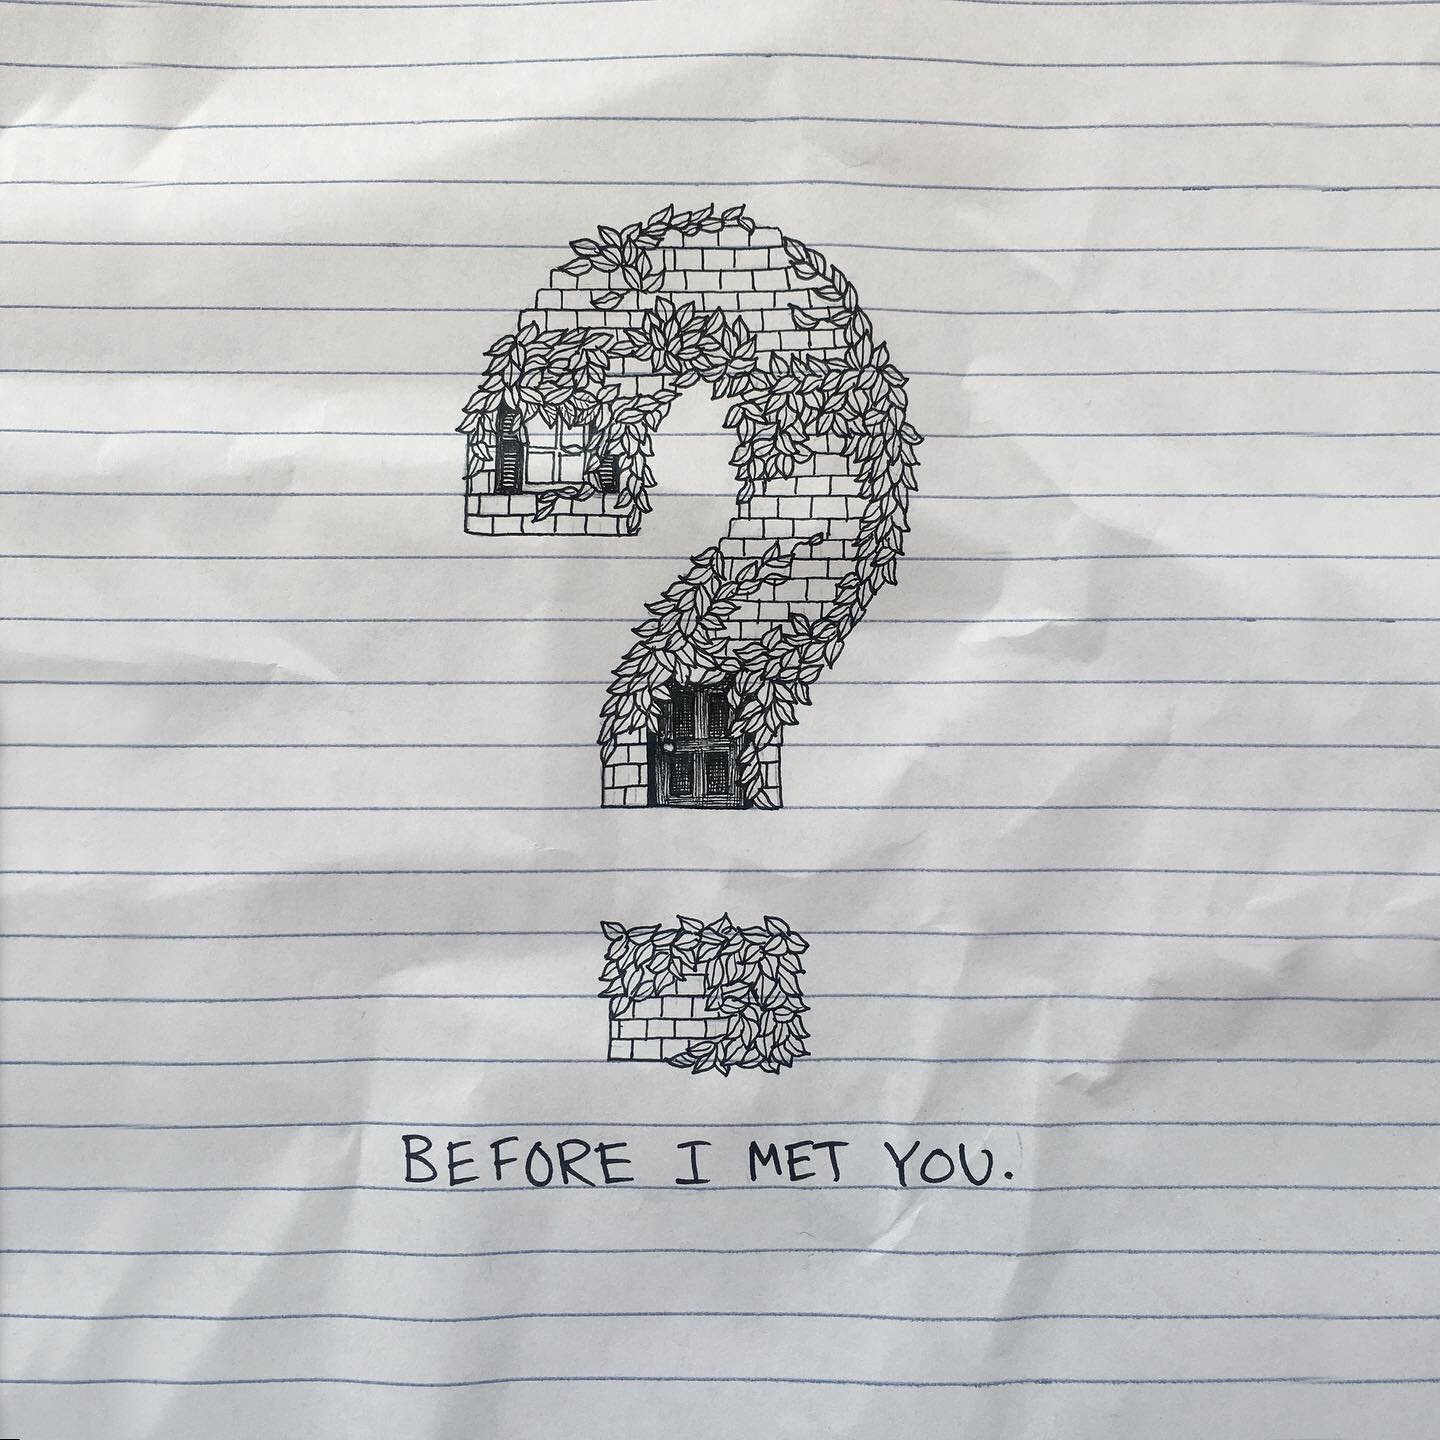 Songs from 2014 are now released on my EP called BEFORE I MET YOU. Look for this album art (by @zachnolin_ ) on all streaming platforms. 
.
Let me know what you think of all the new music in the comments! More music to come.